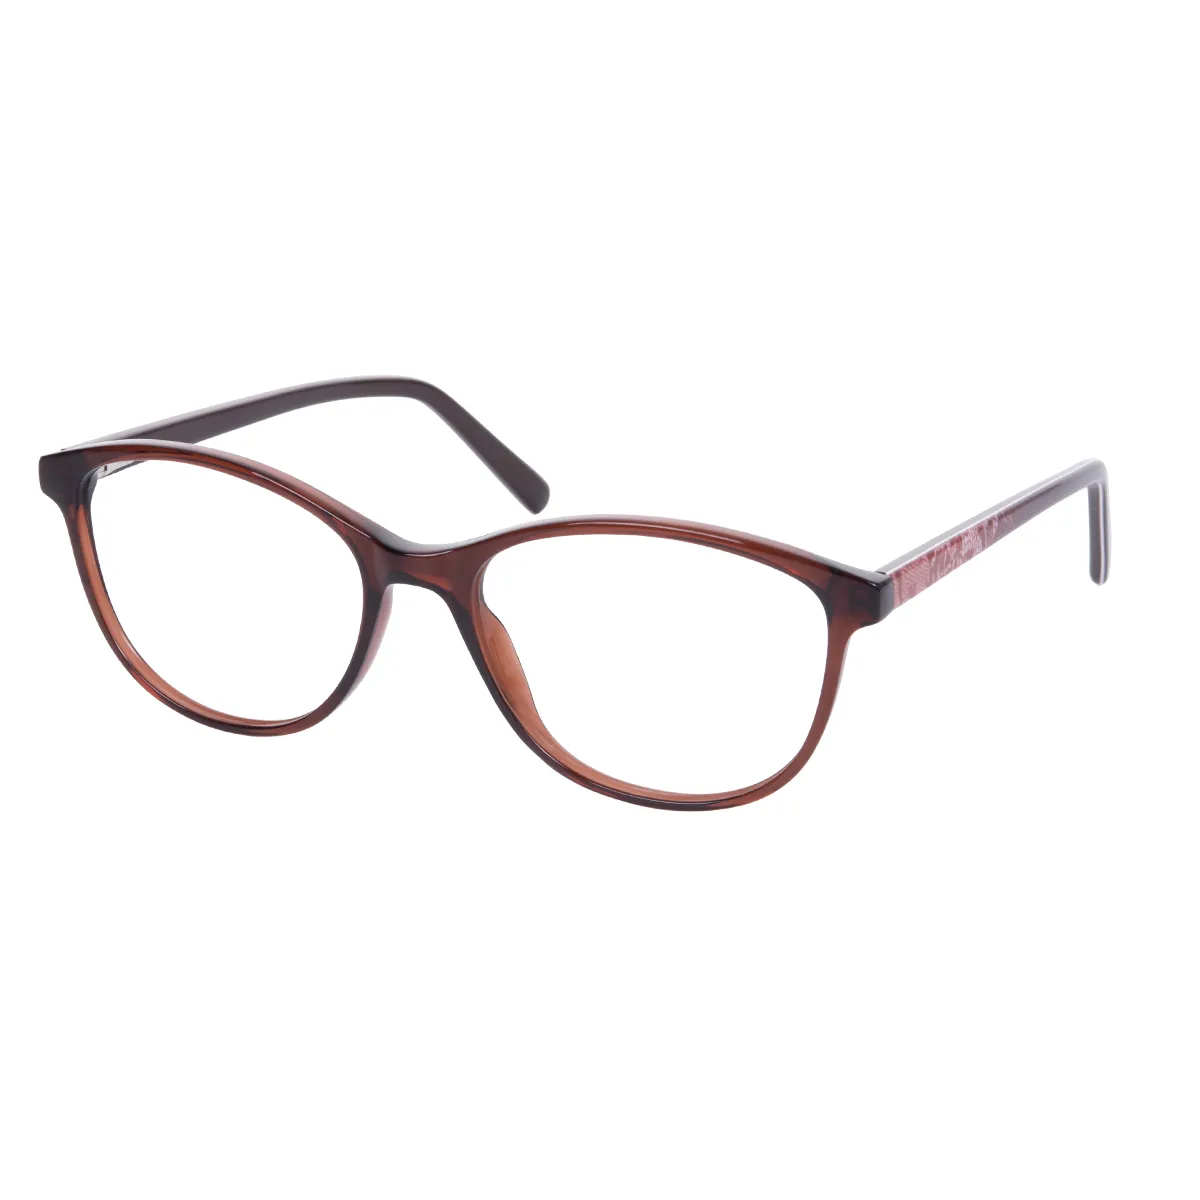 Beverly - Oval Brown Glasses for Women